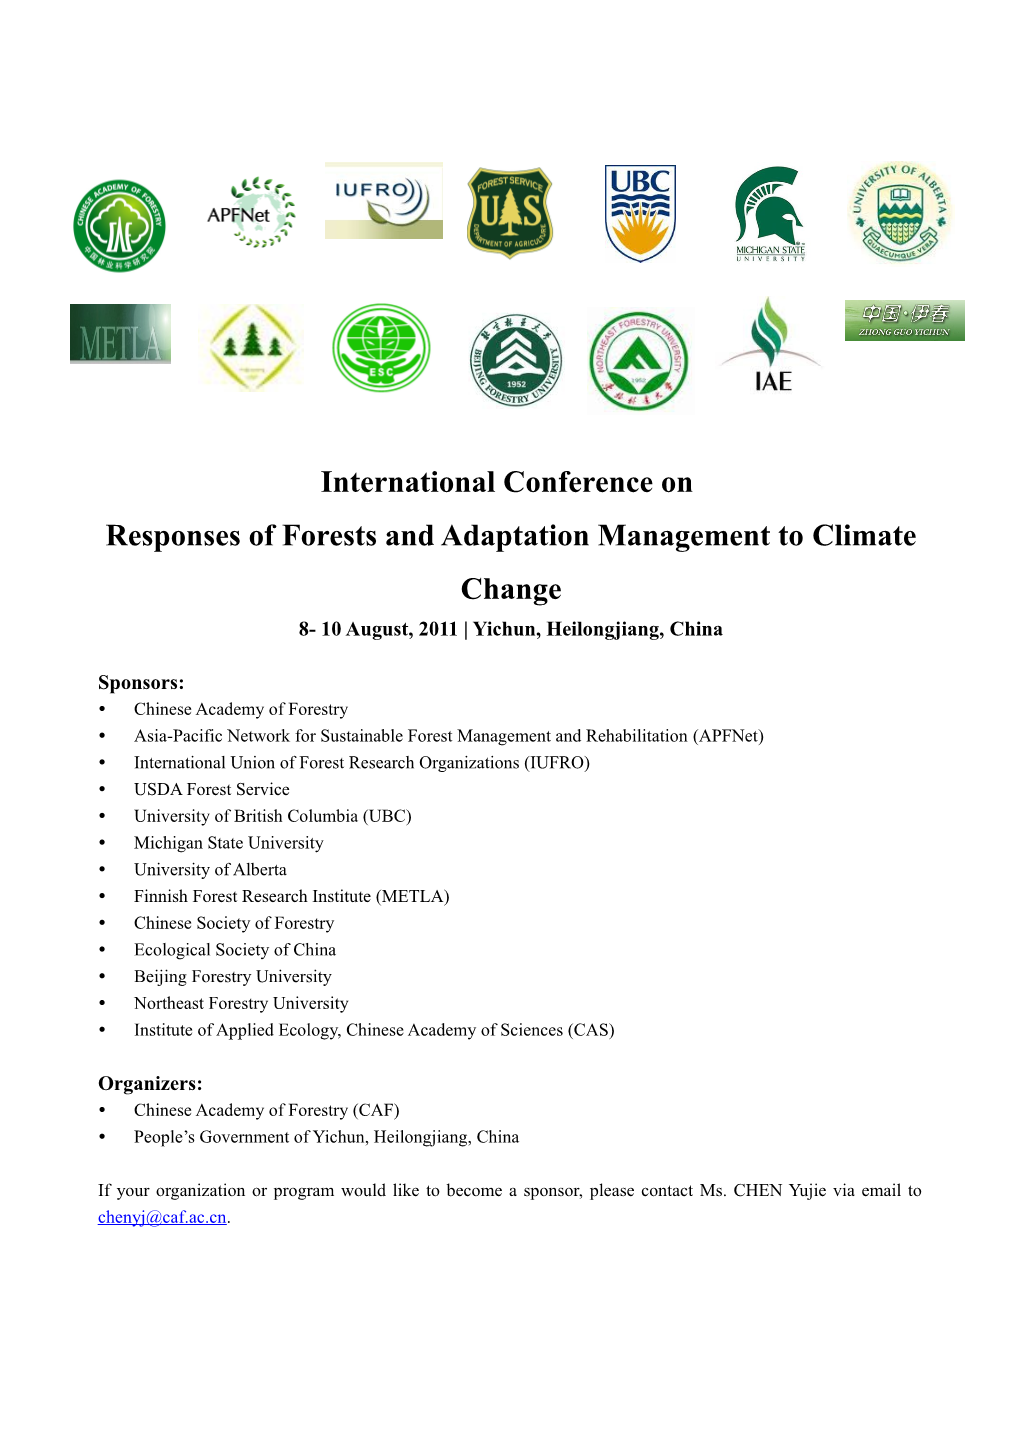 Responses of Forests and Adaptation Management Toclimate Change